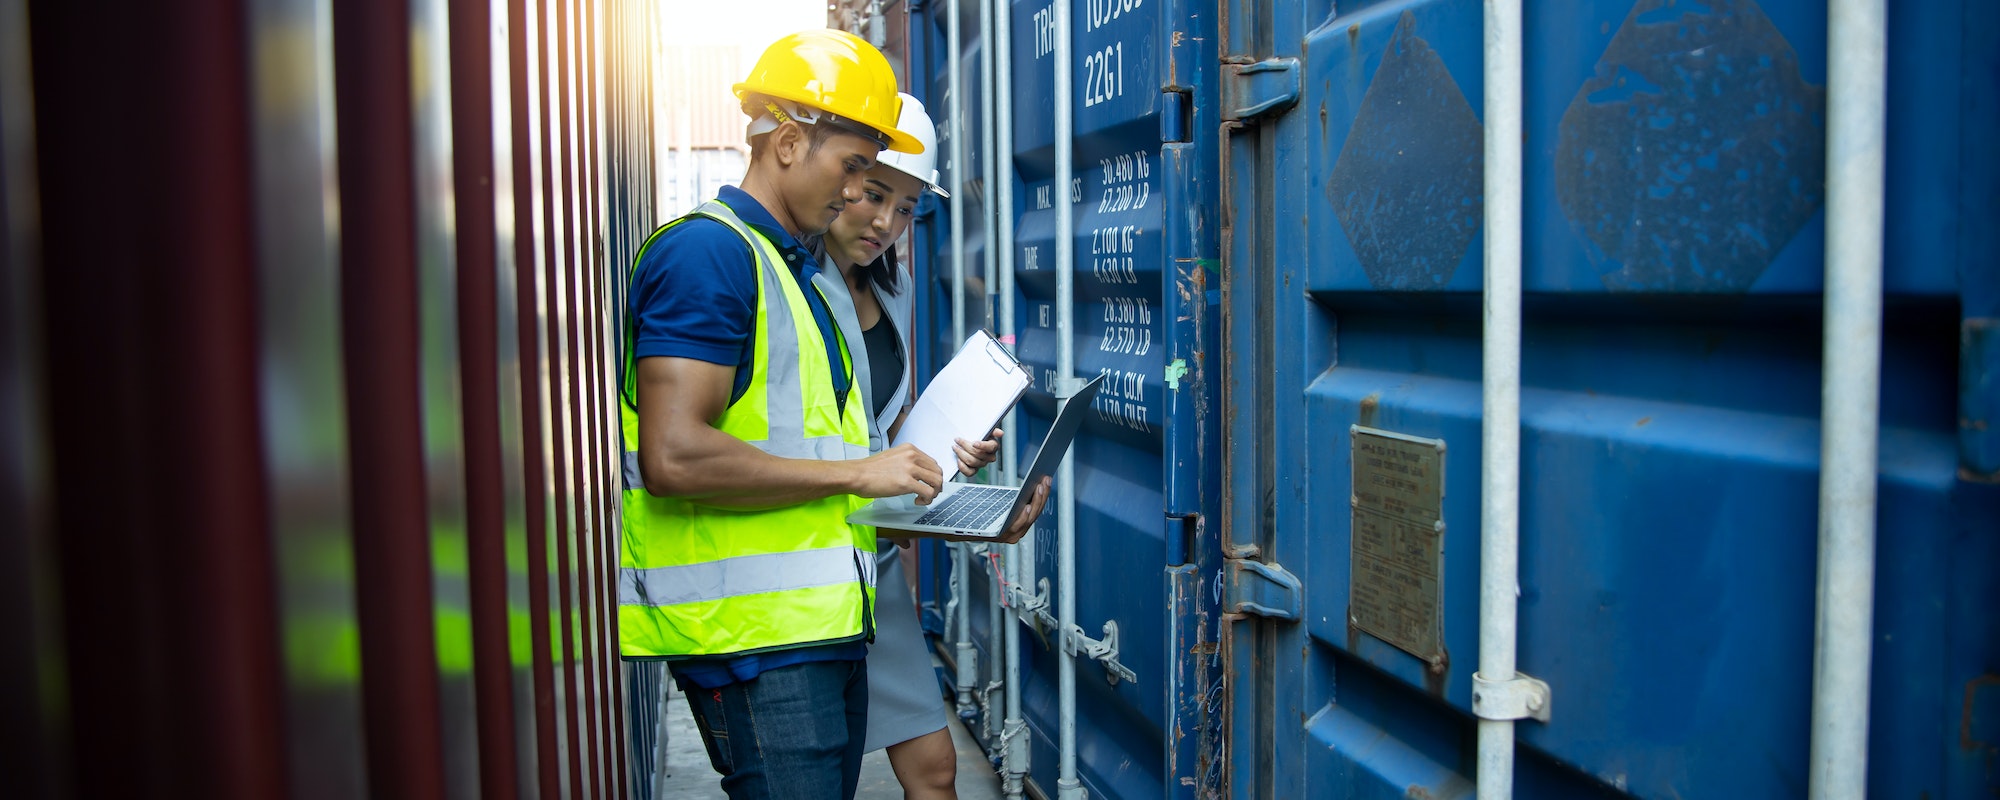 businesspeople or engineer check goods in industrial container, transport and logistics